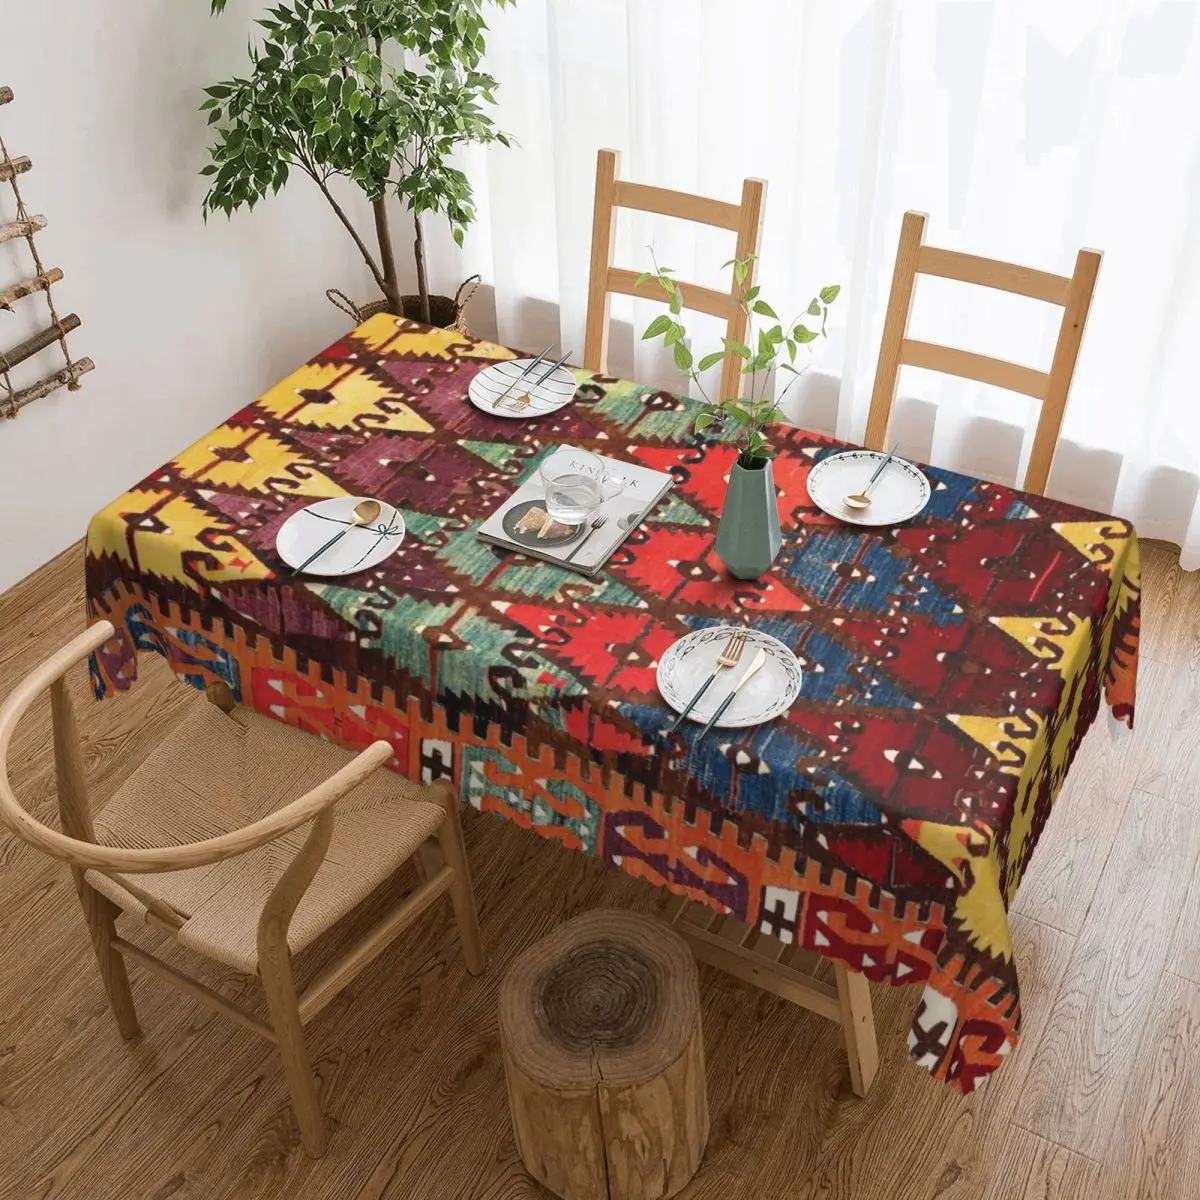 

Aksaray Antique Turkish Kilim Tablecloth Vintage Boho Bohemian Ethnic Persian Tribal Table Cloth Cover for Dining Room